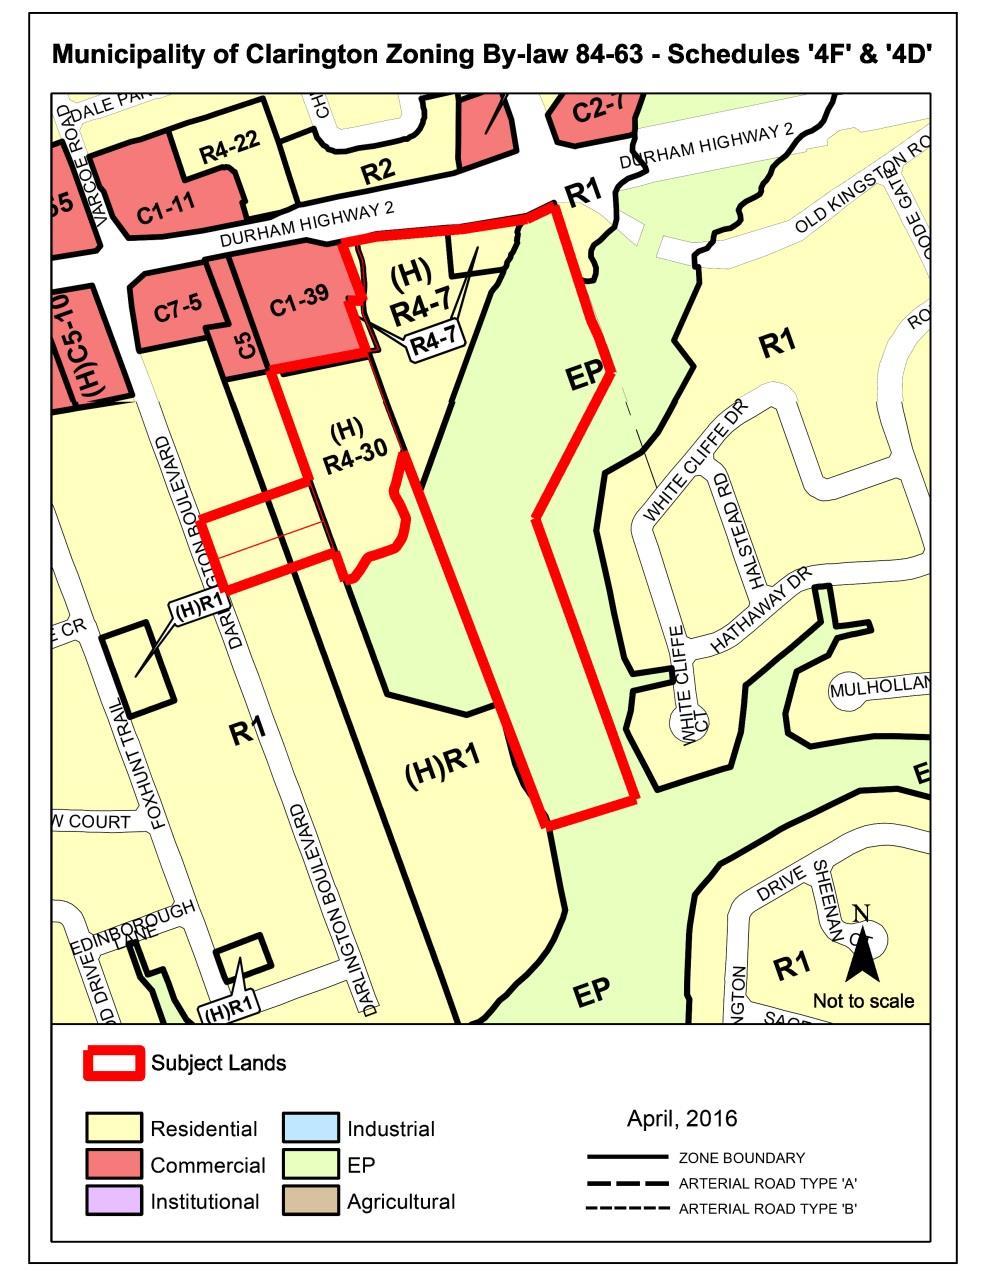 Municipality of Clarington Zoning By-law 84-63 Existing Zones Residential Type Four - (H)R4-7 Residential Type Four - R4-7 Residential Type Four - (H)R4-30 Residential Type One - (H)R1 Residential